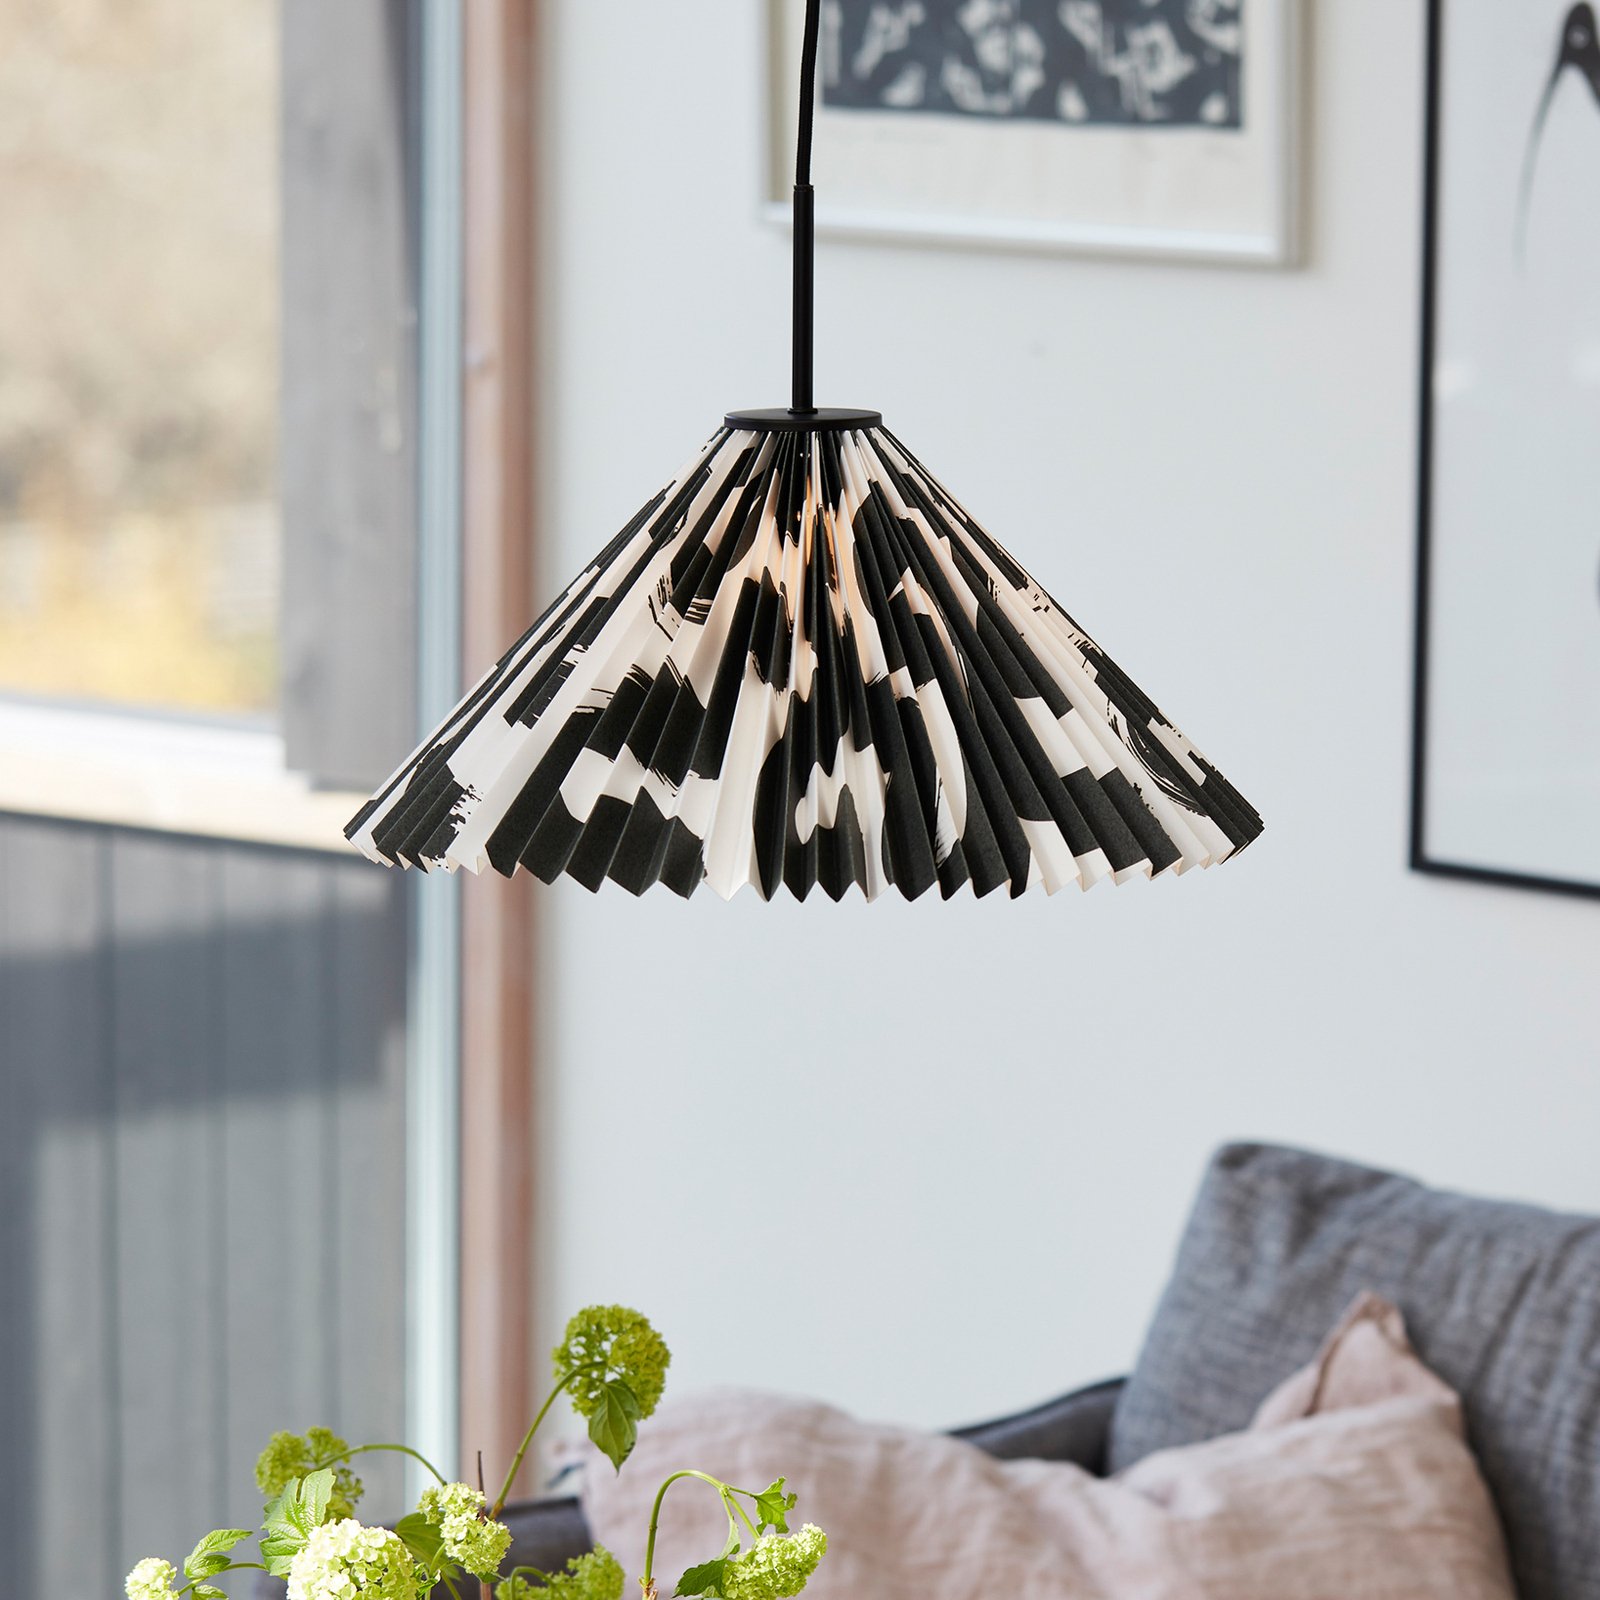 PR Home Polly hanglamp in origami-ontwerp